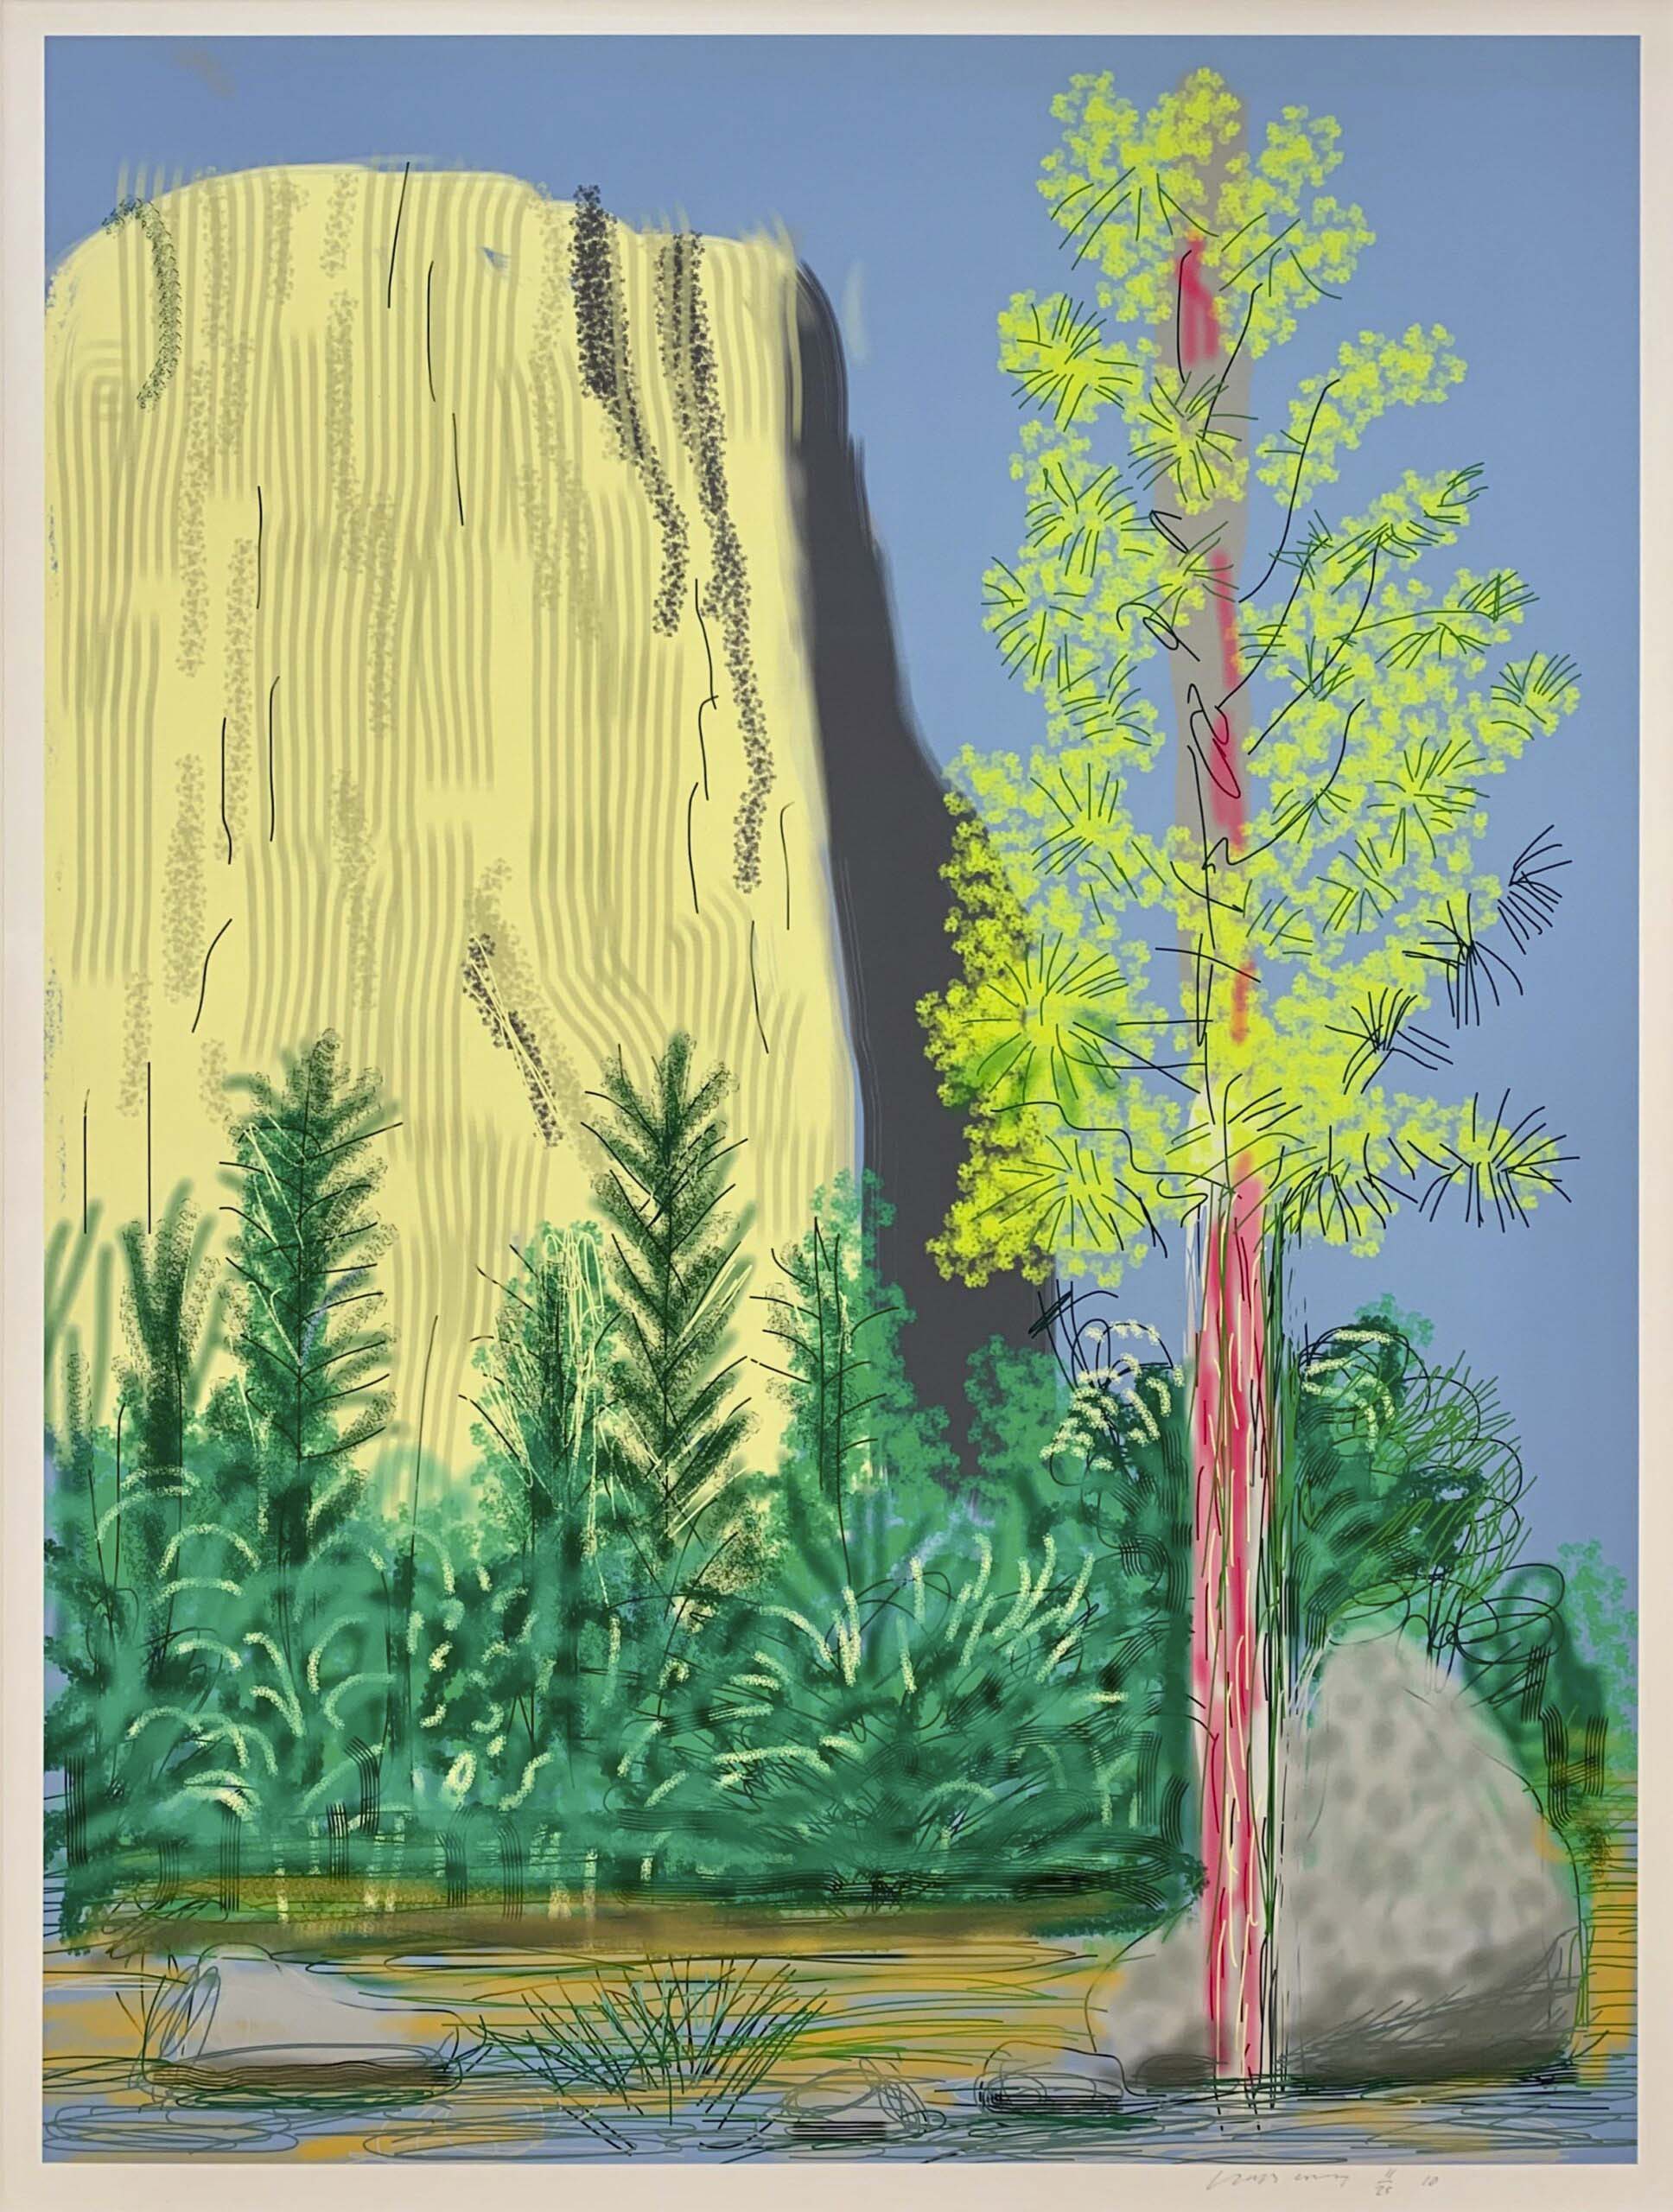 Untitled No.22 from The Yosemite Suite 2010, iPad drawing printed on paper, Ed 11/25, 37″ x 30″ £55,000.